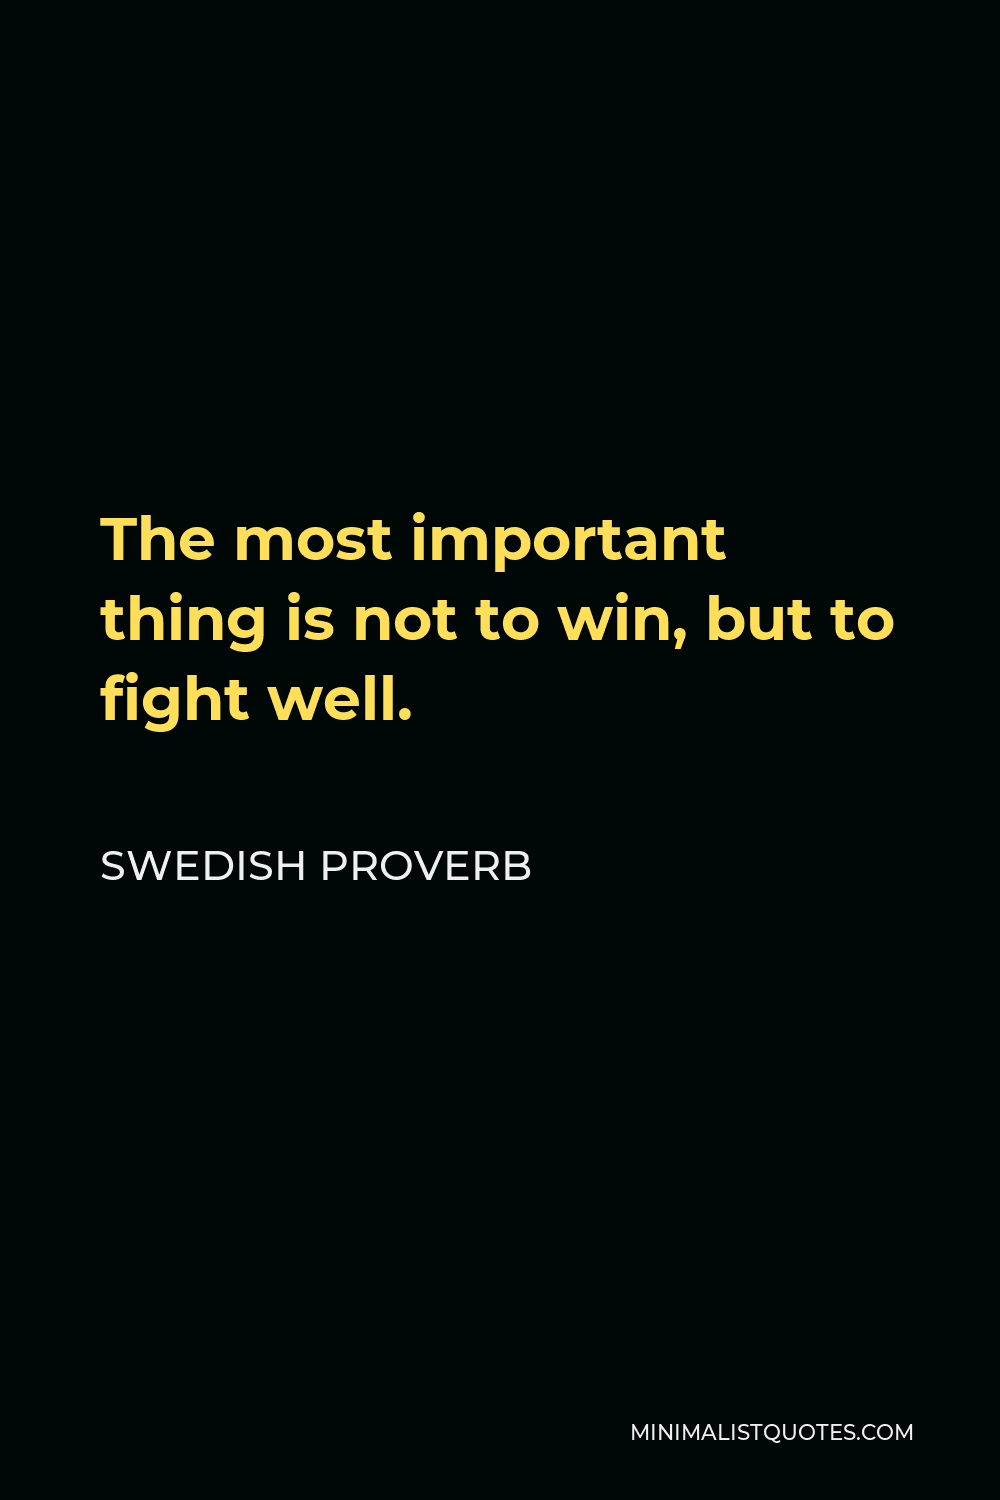 Swedish Proverb Quote - The most important thing is not to win, but to fight well.